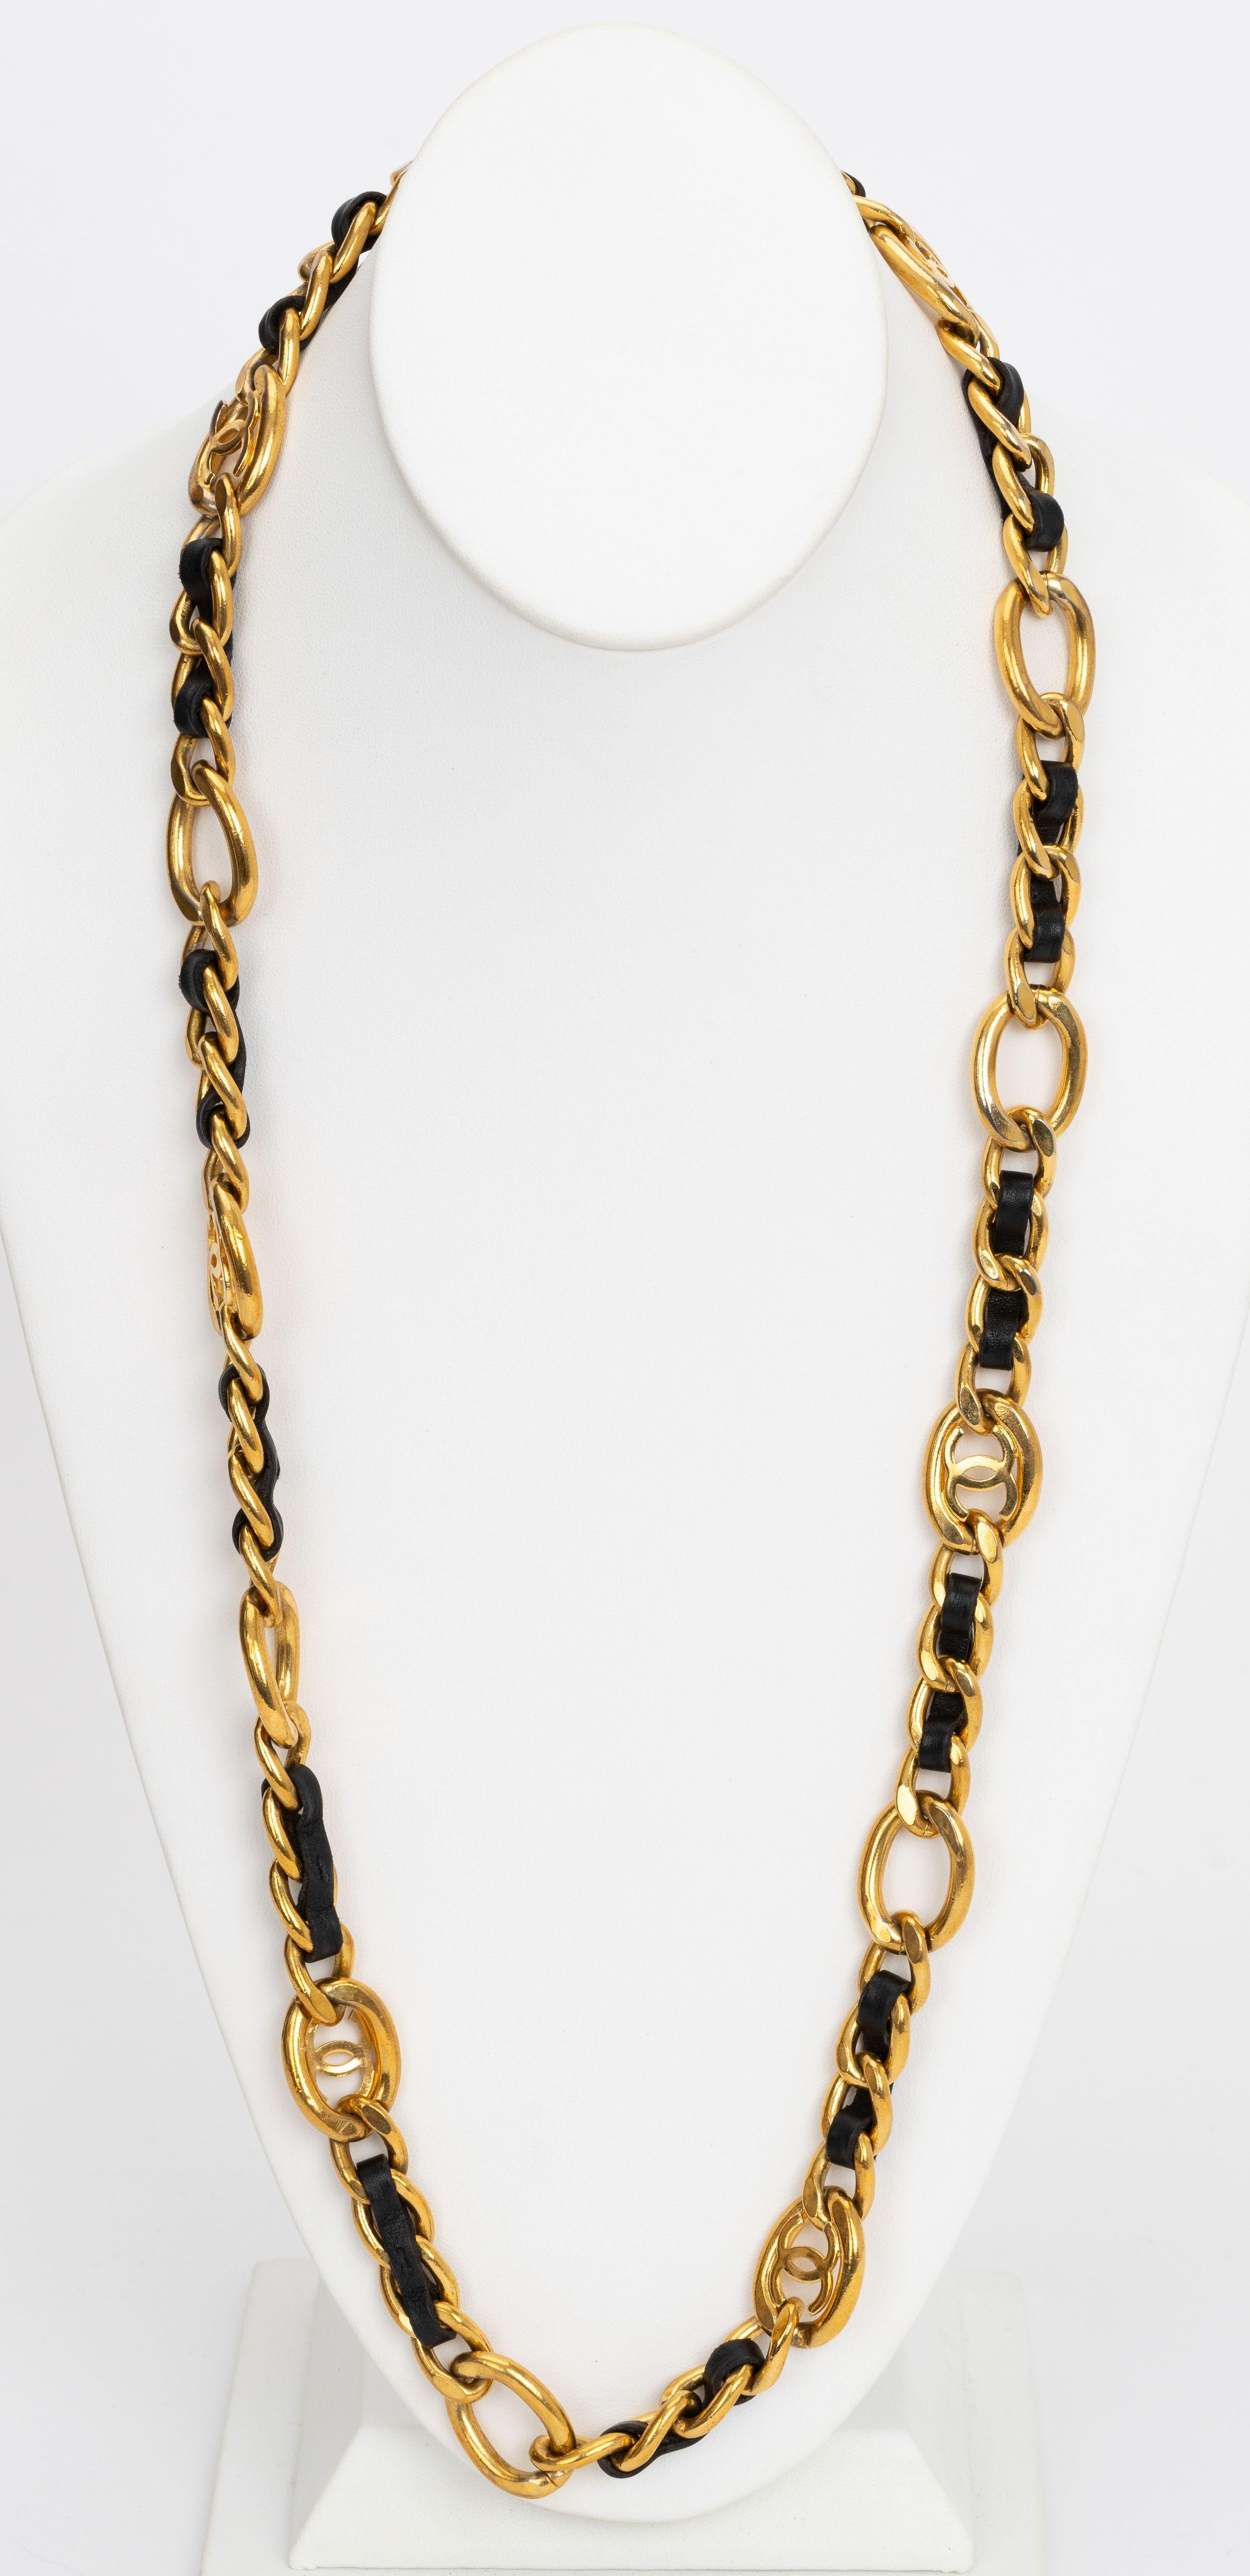 Chanel 90s 24 kt gold plated chain belt with black lambskin leather. Can be worn as a necklace or as a belt . Spring 96 collection. Comes with original dust cover or box.